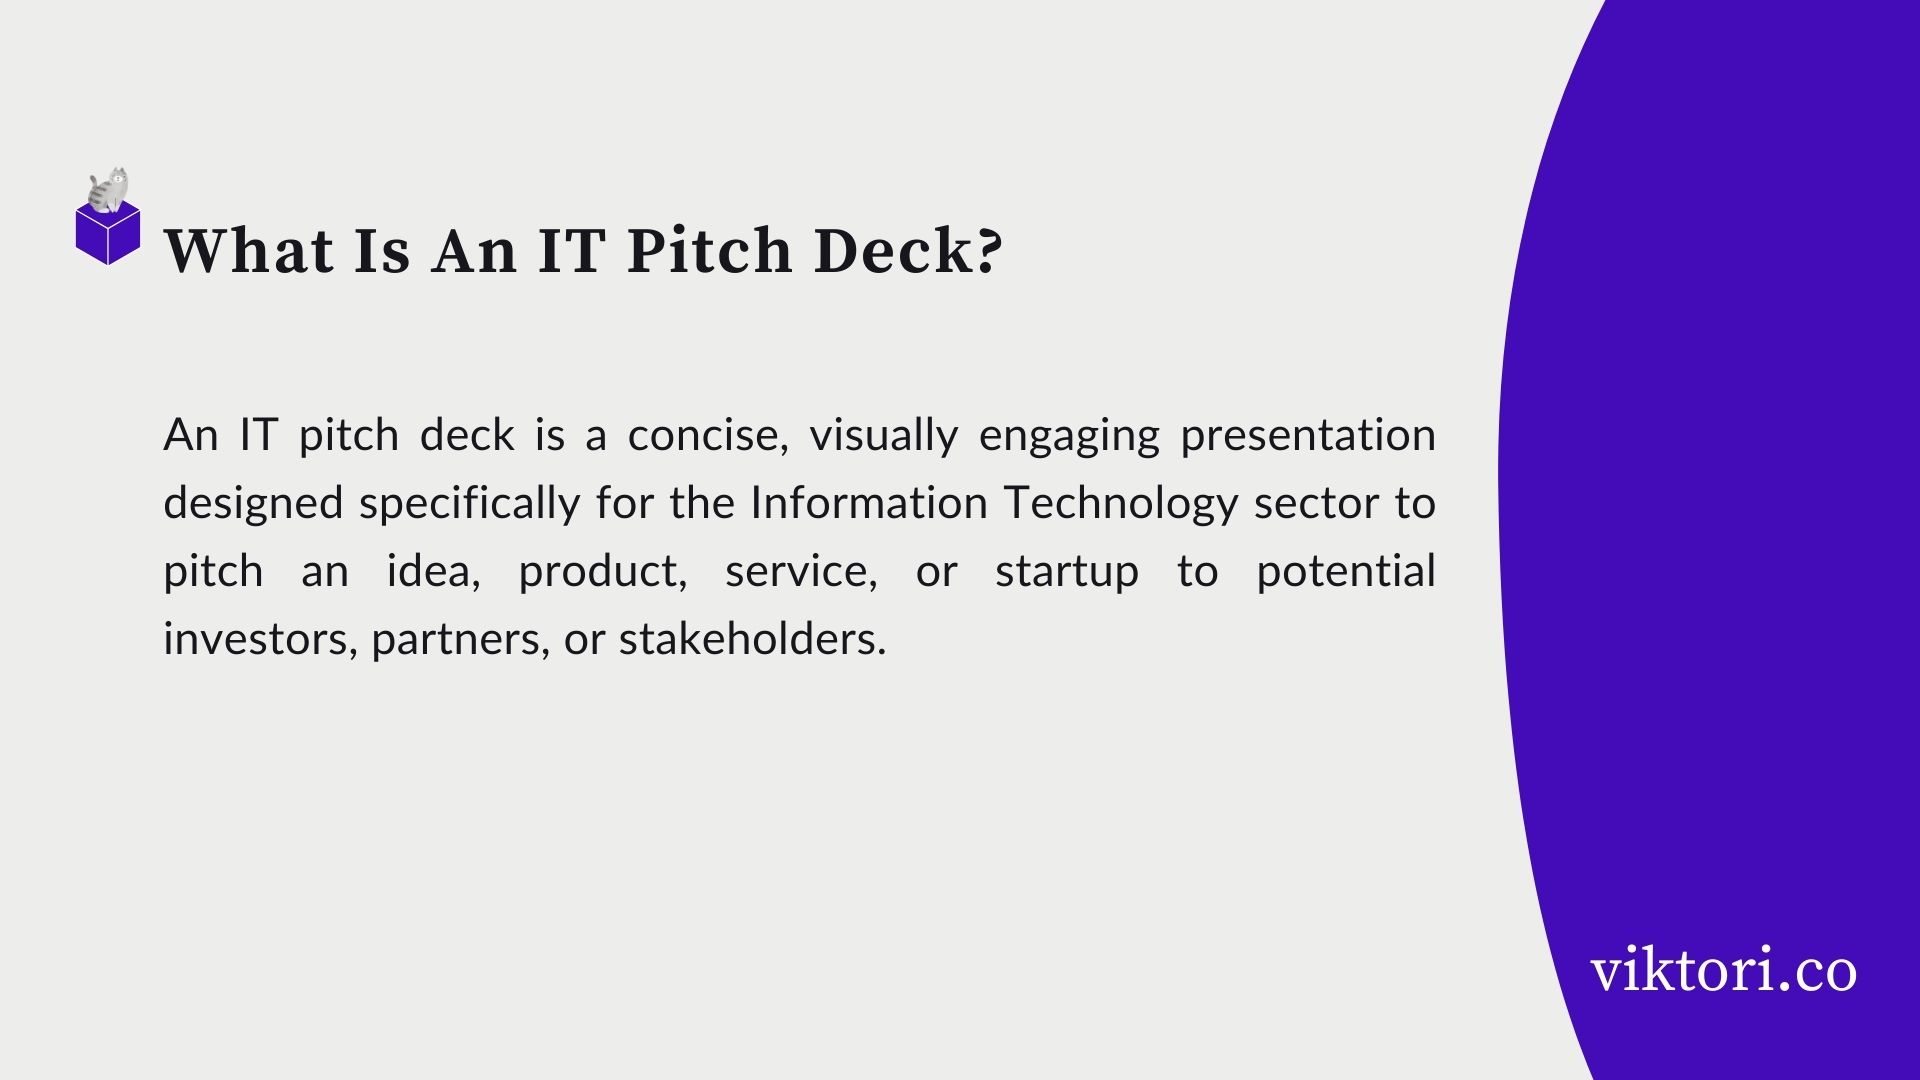 IT pitch deck guide: definition